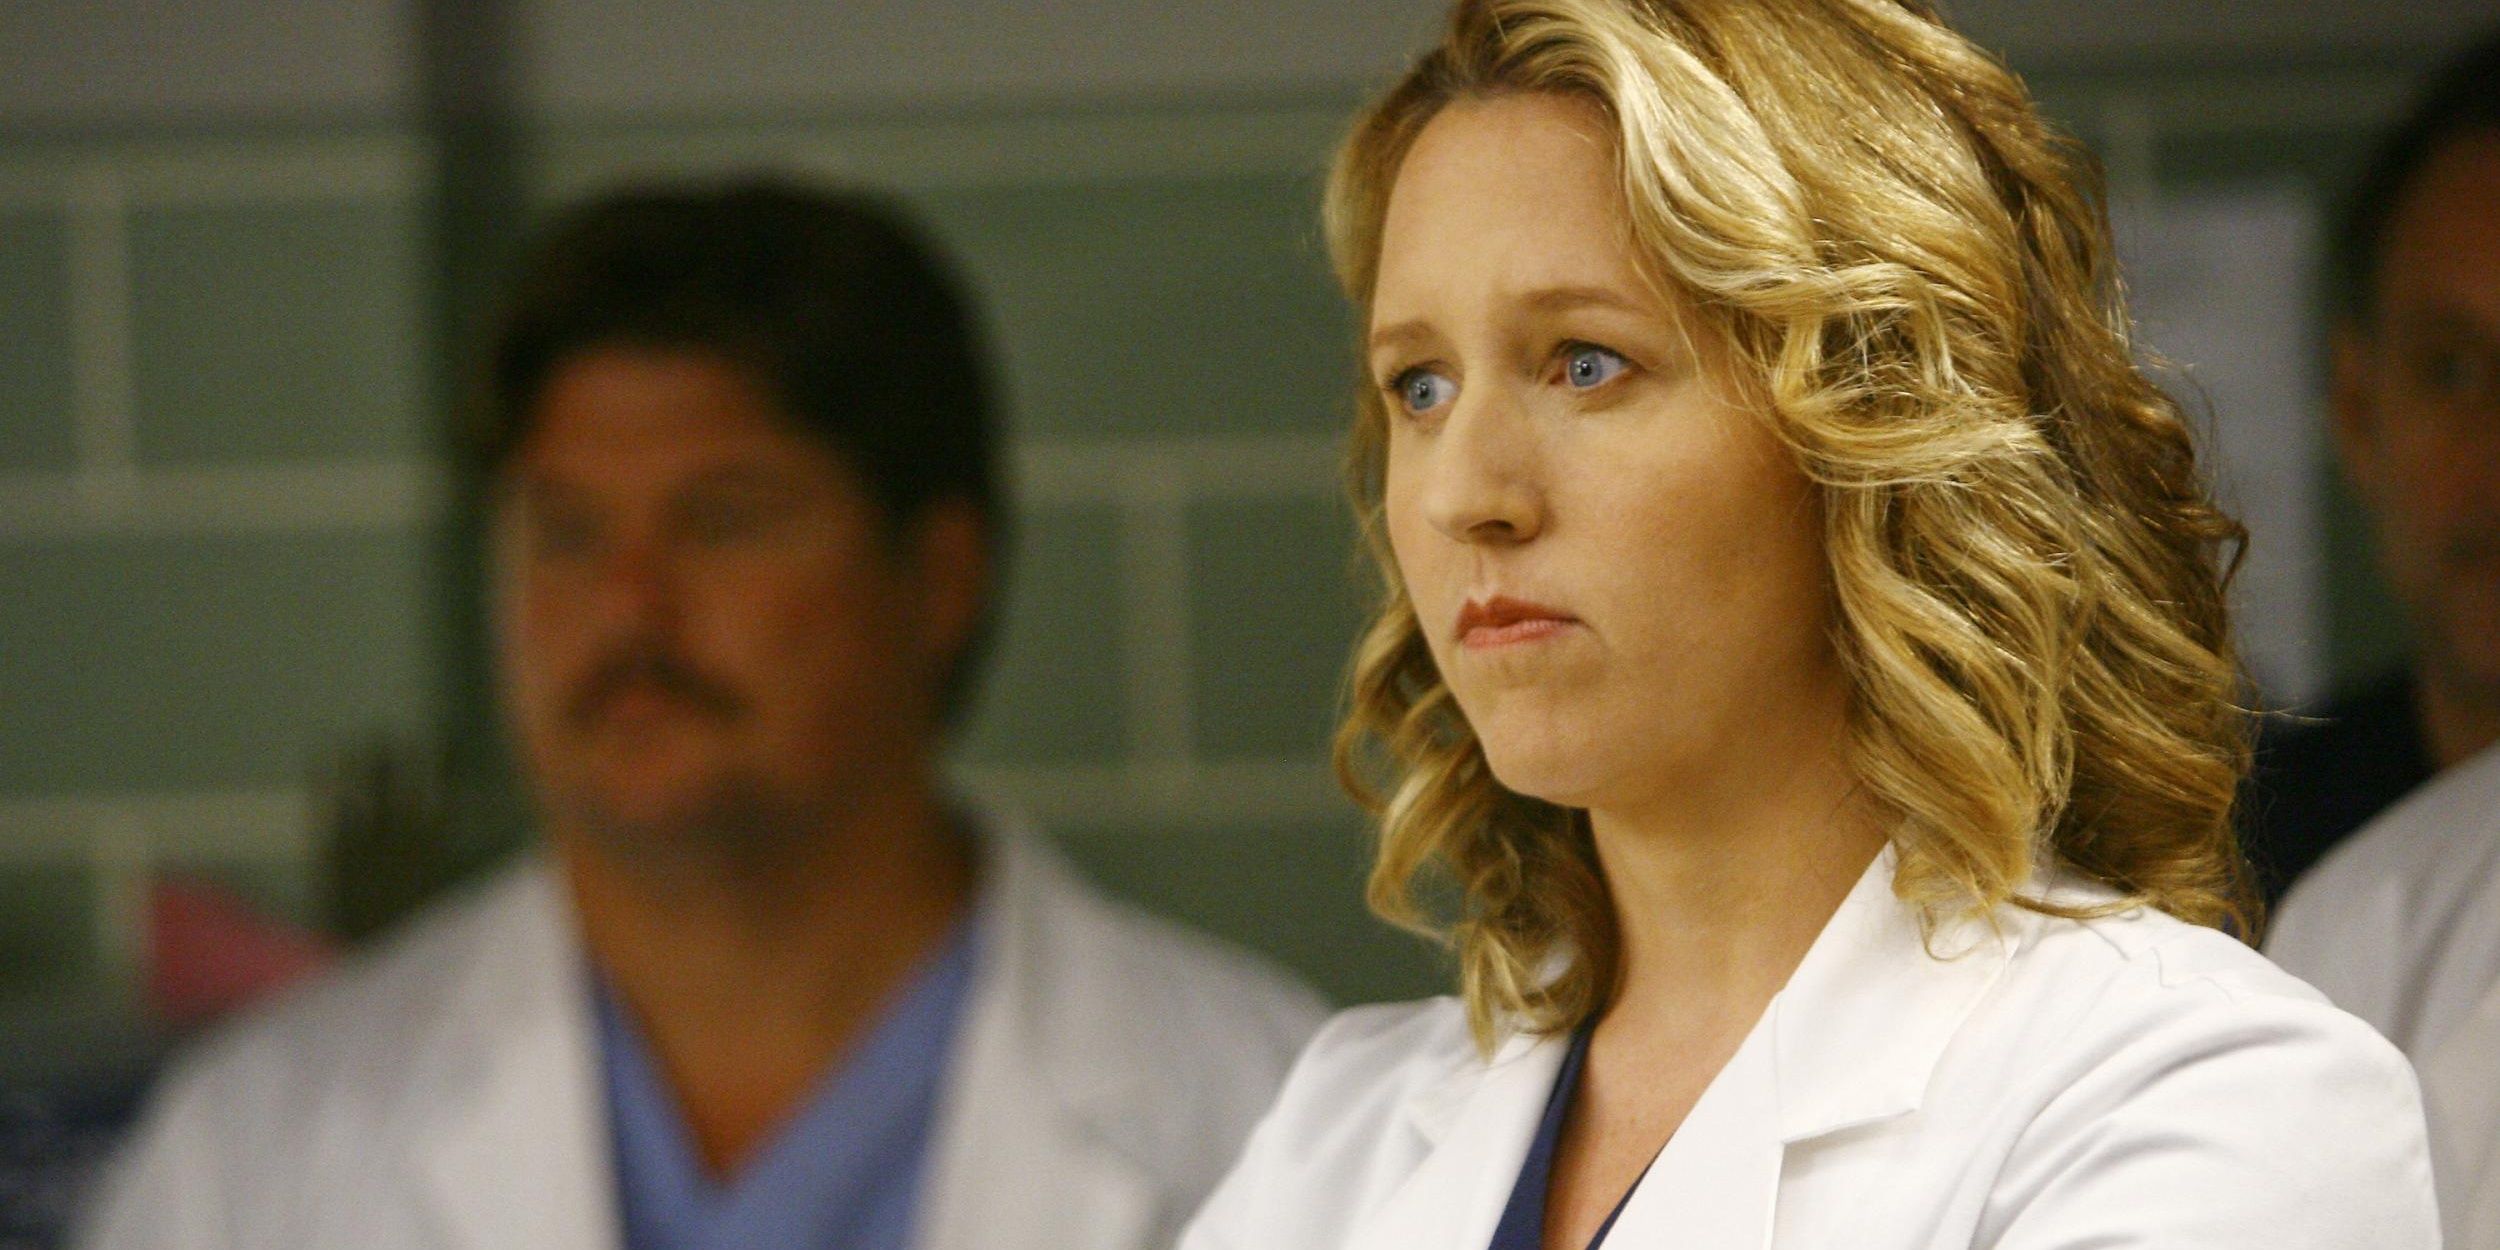 Erica learns about Izzie's involvement in the LVAD wire incident in Grey's Anatomy